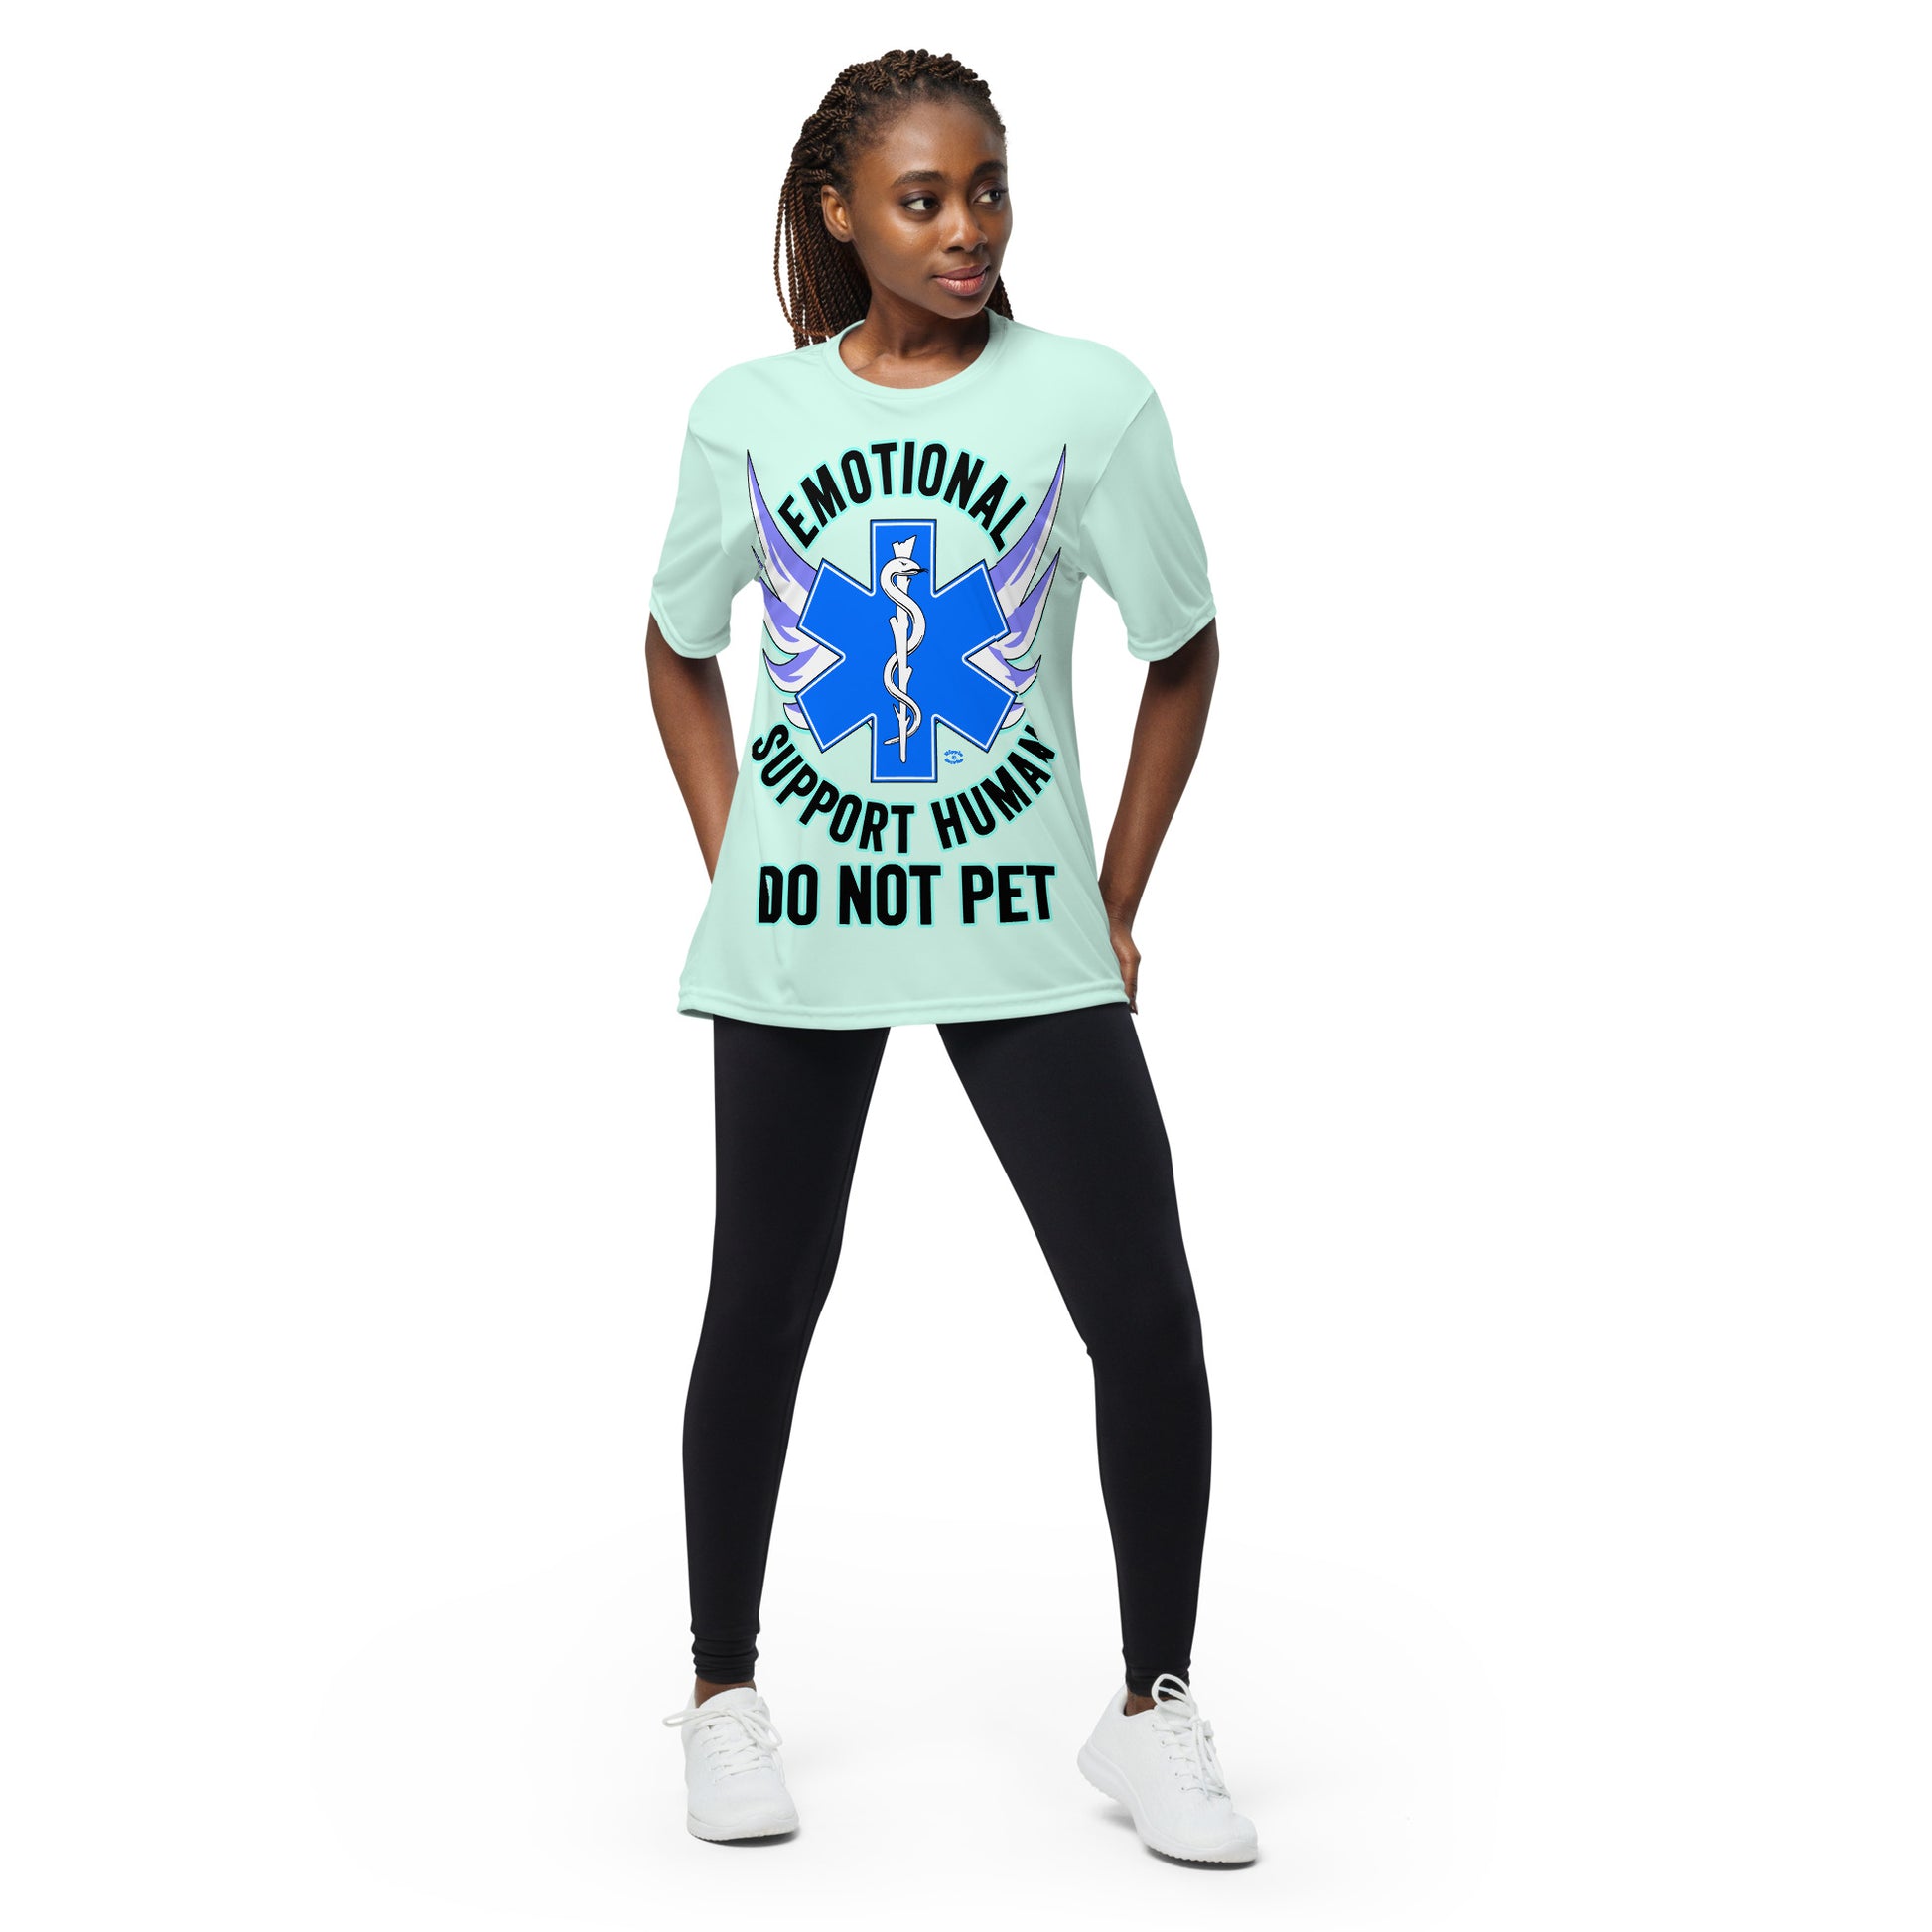 A woman wearing a tshirt with a big blue cross and a Rod of Asclepius inside. Text around the cross says Emotional Support Human DO NOT PET - pastel mint